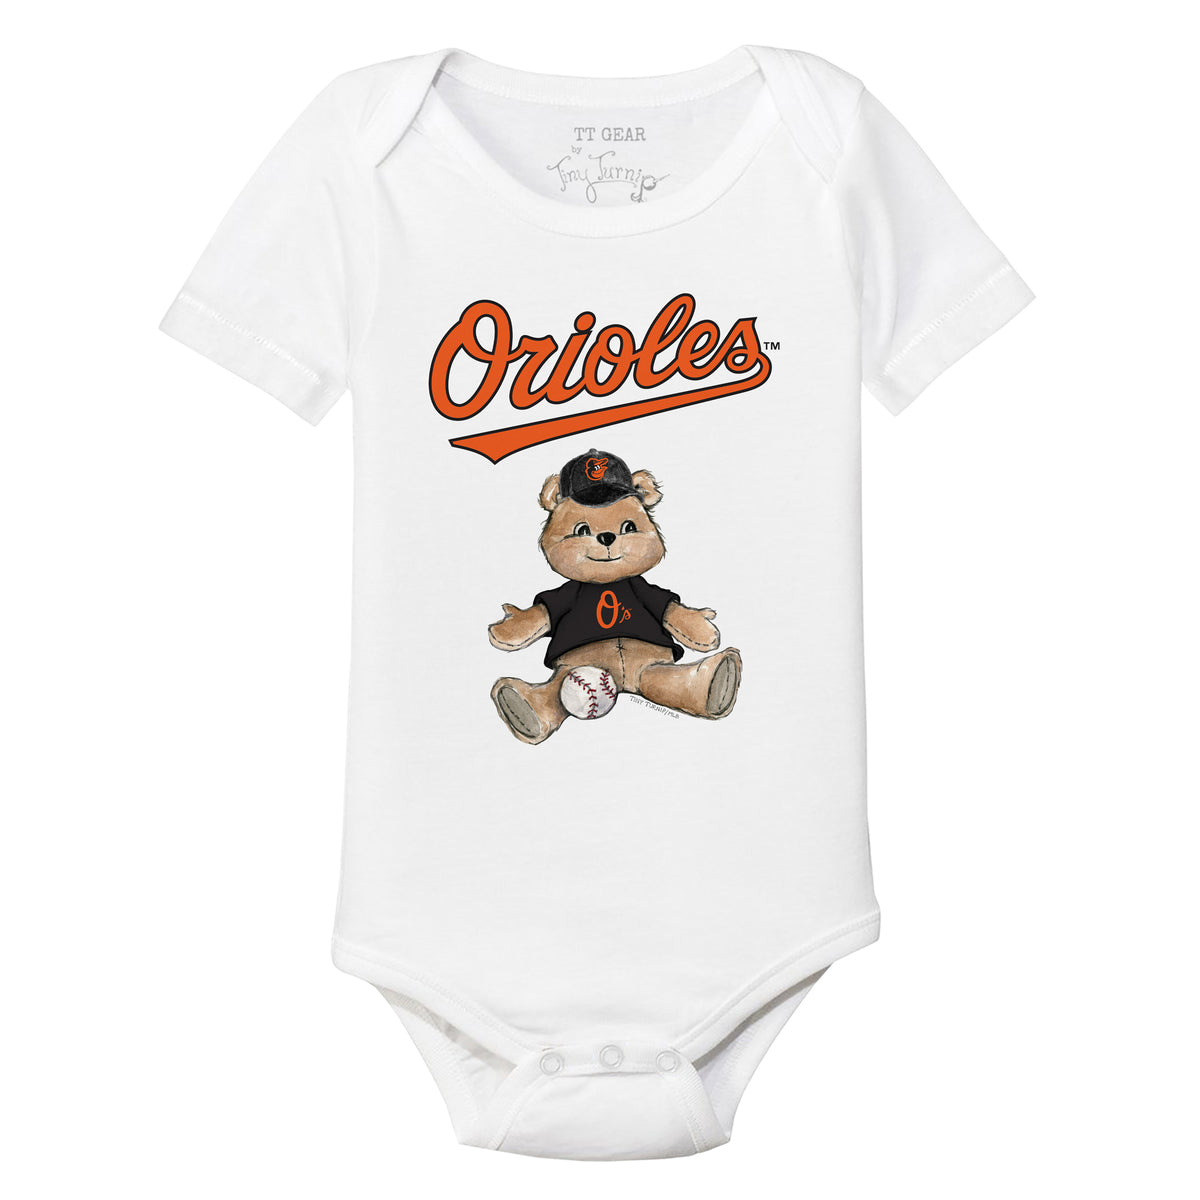 Orioles baby/infant clothes Orioles baby gift Baltimore baseball baby gift